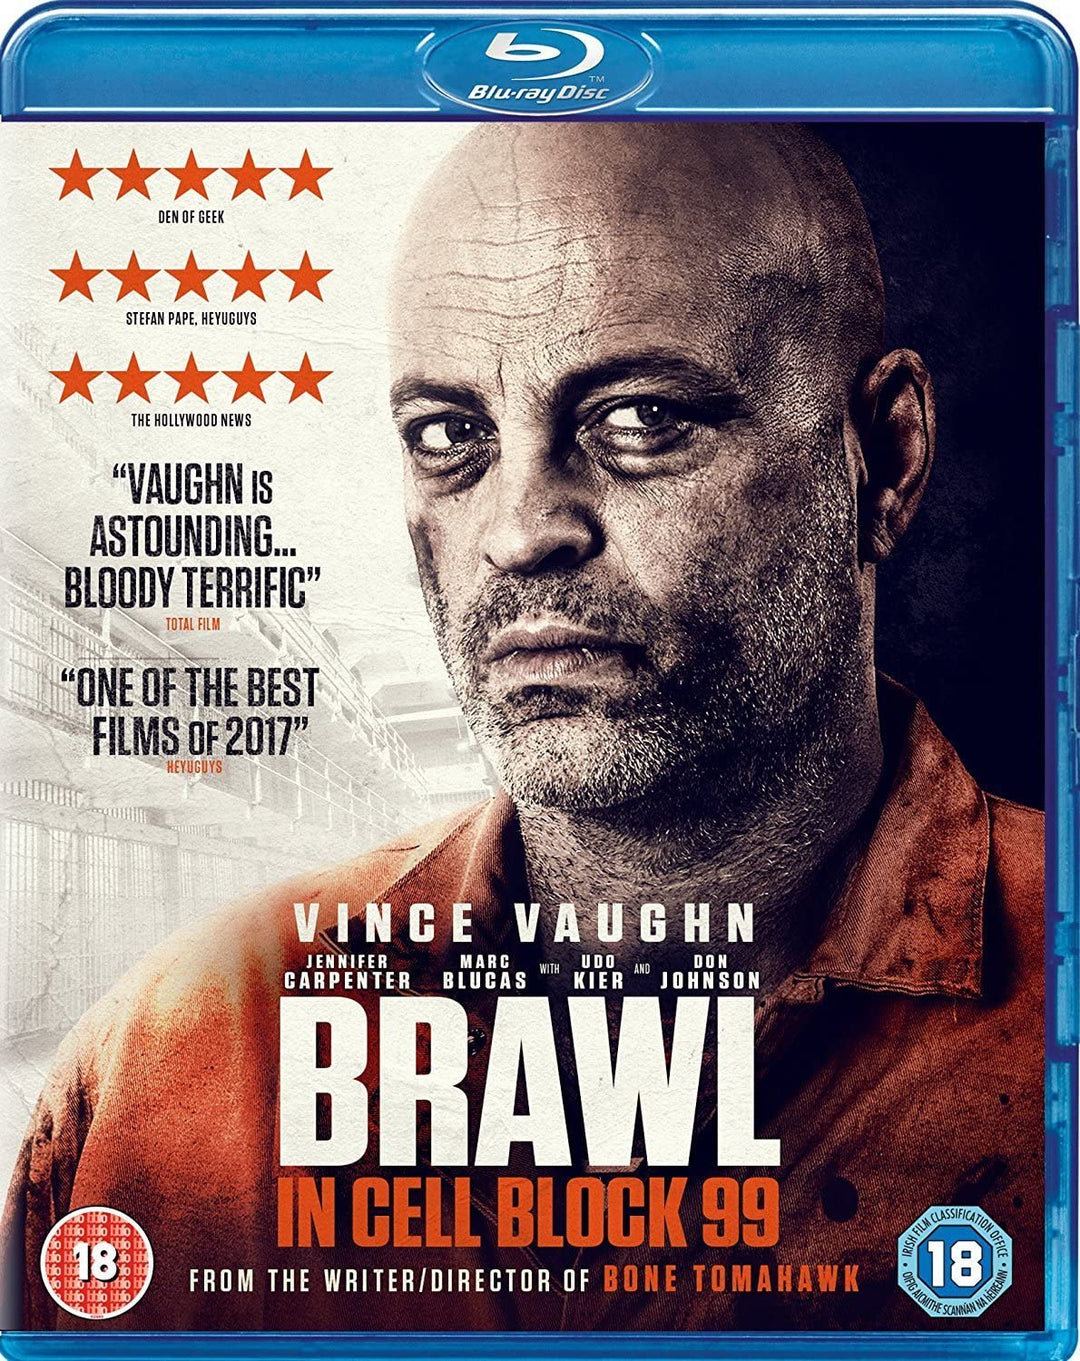 Brawl In Cell Block 99 - Action/Thriller [Blu-ray]